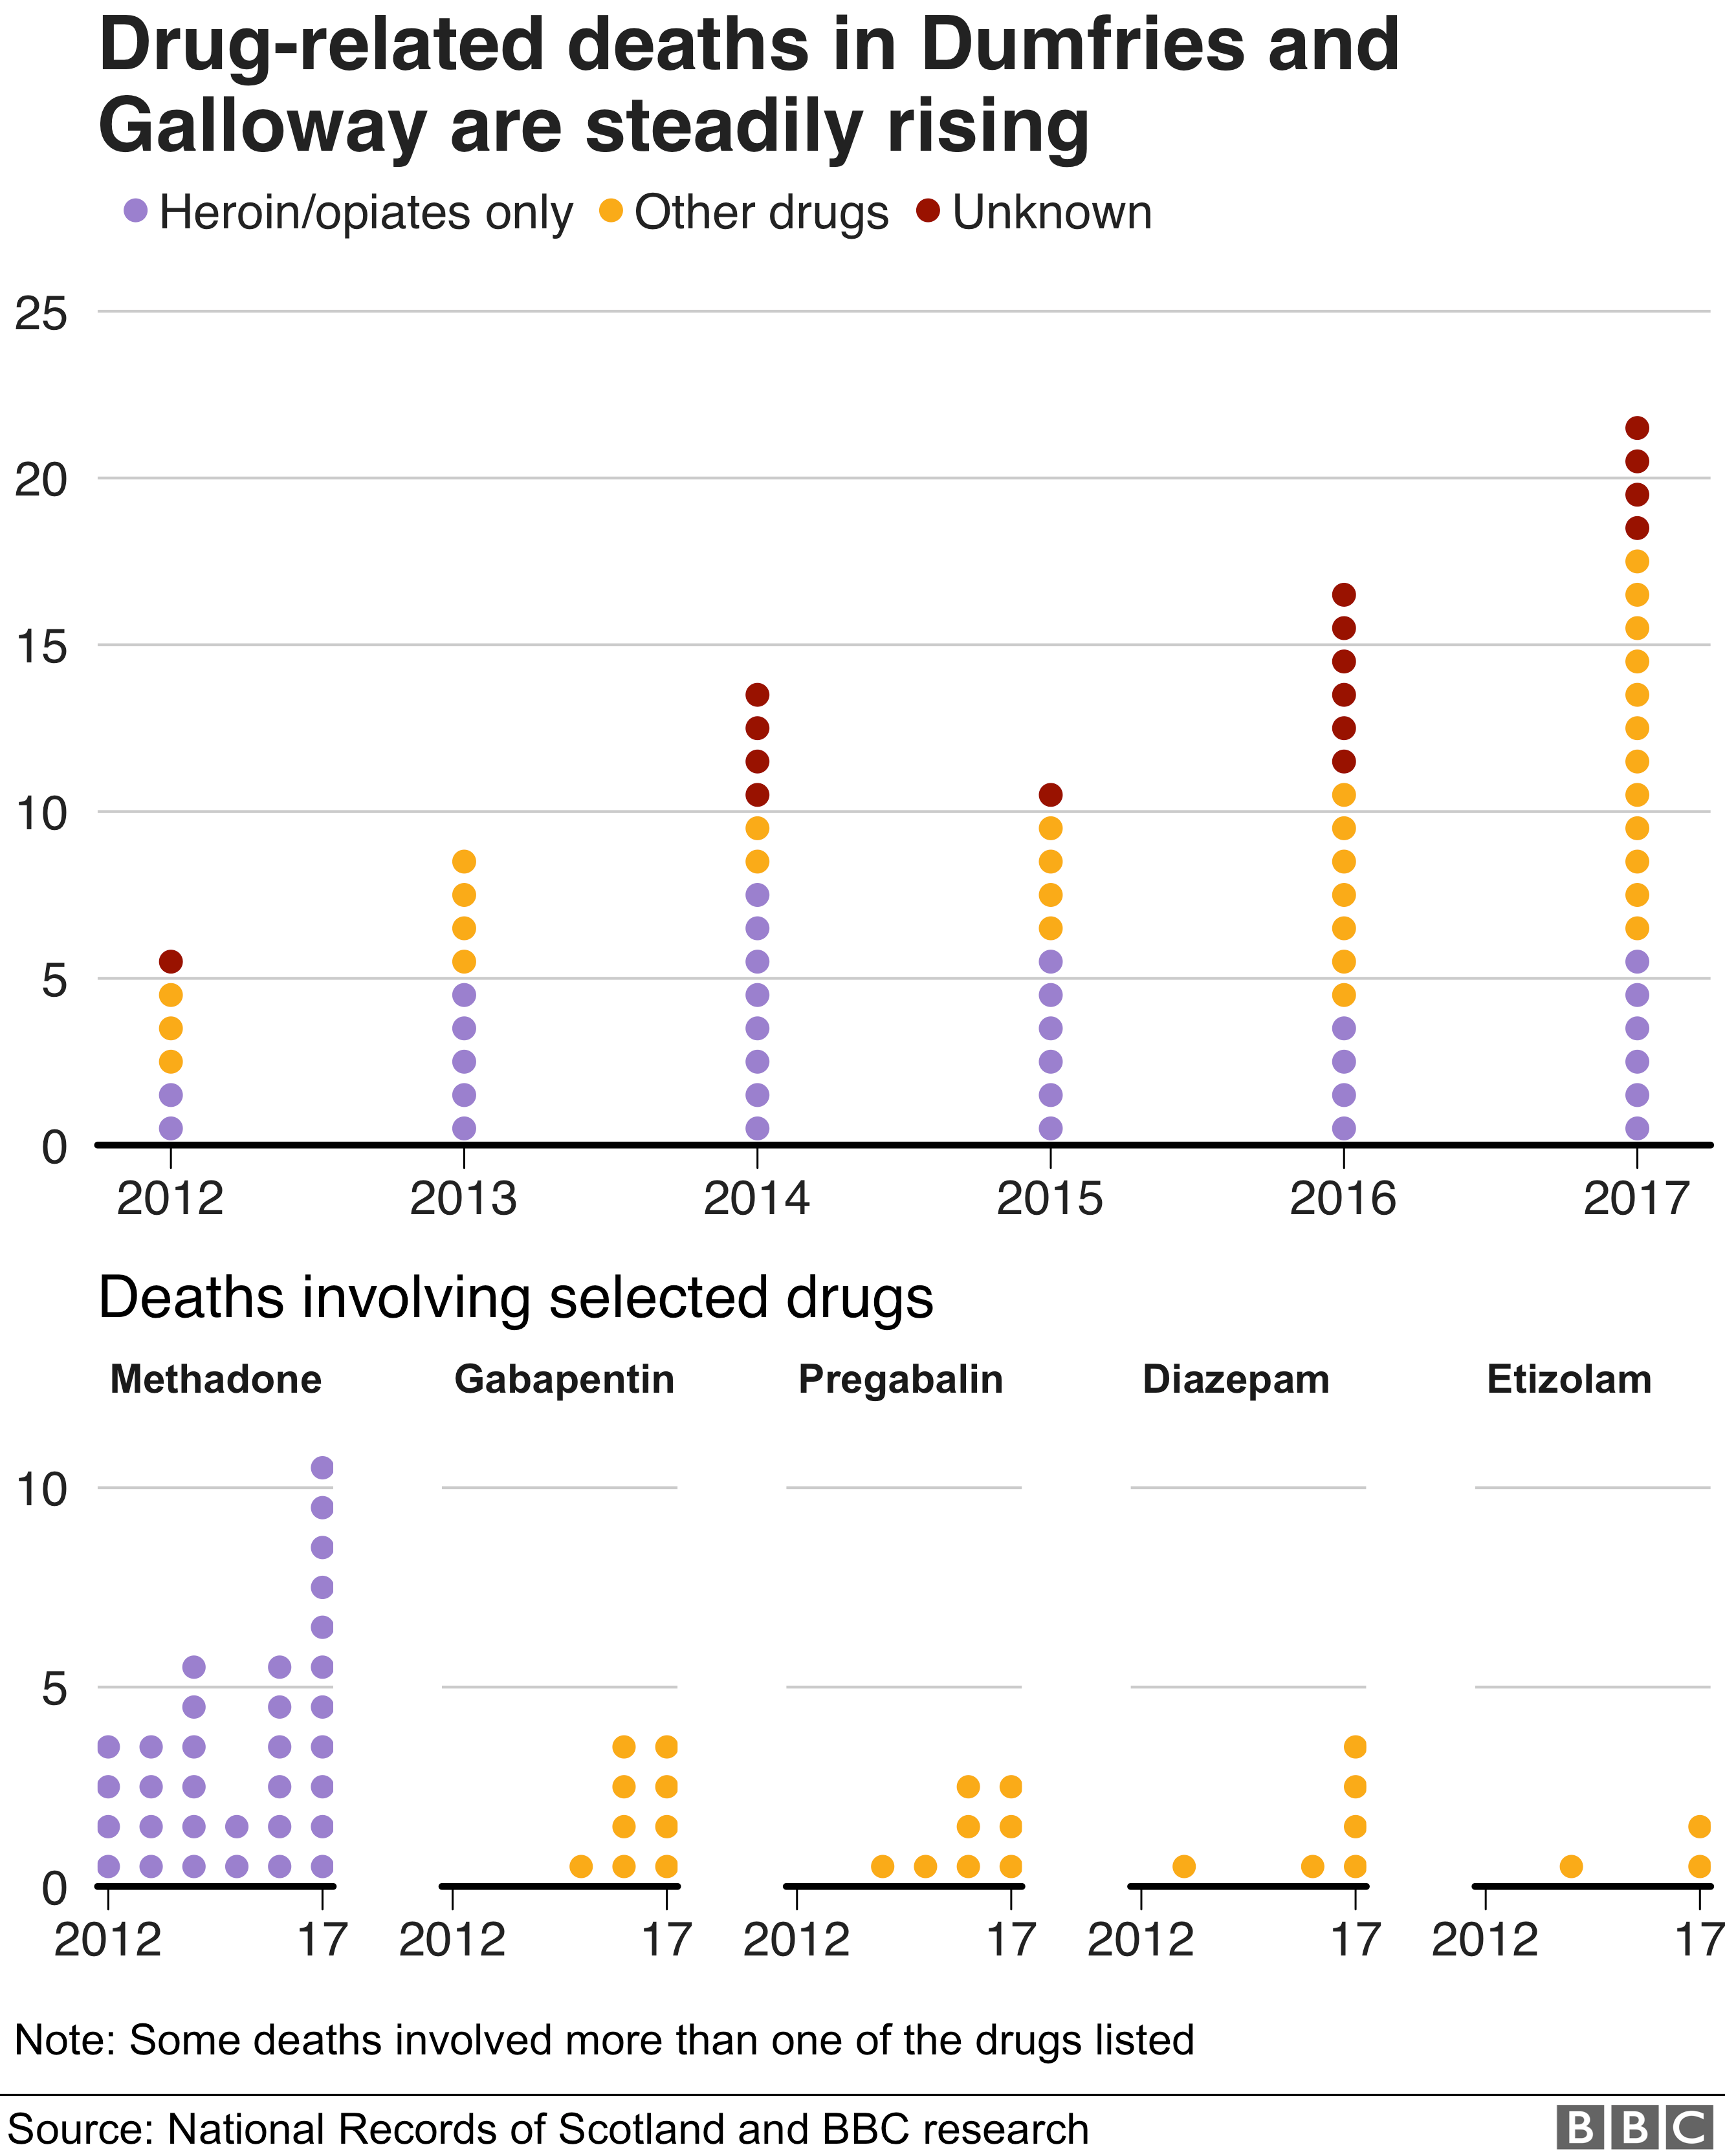 Chart showing how the number of drug-related deaths in Dumfries and Galloway has been steadily rising since 2017